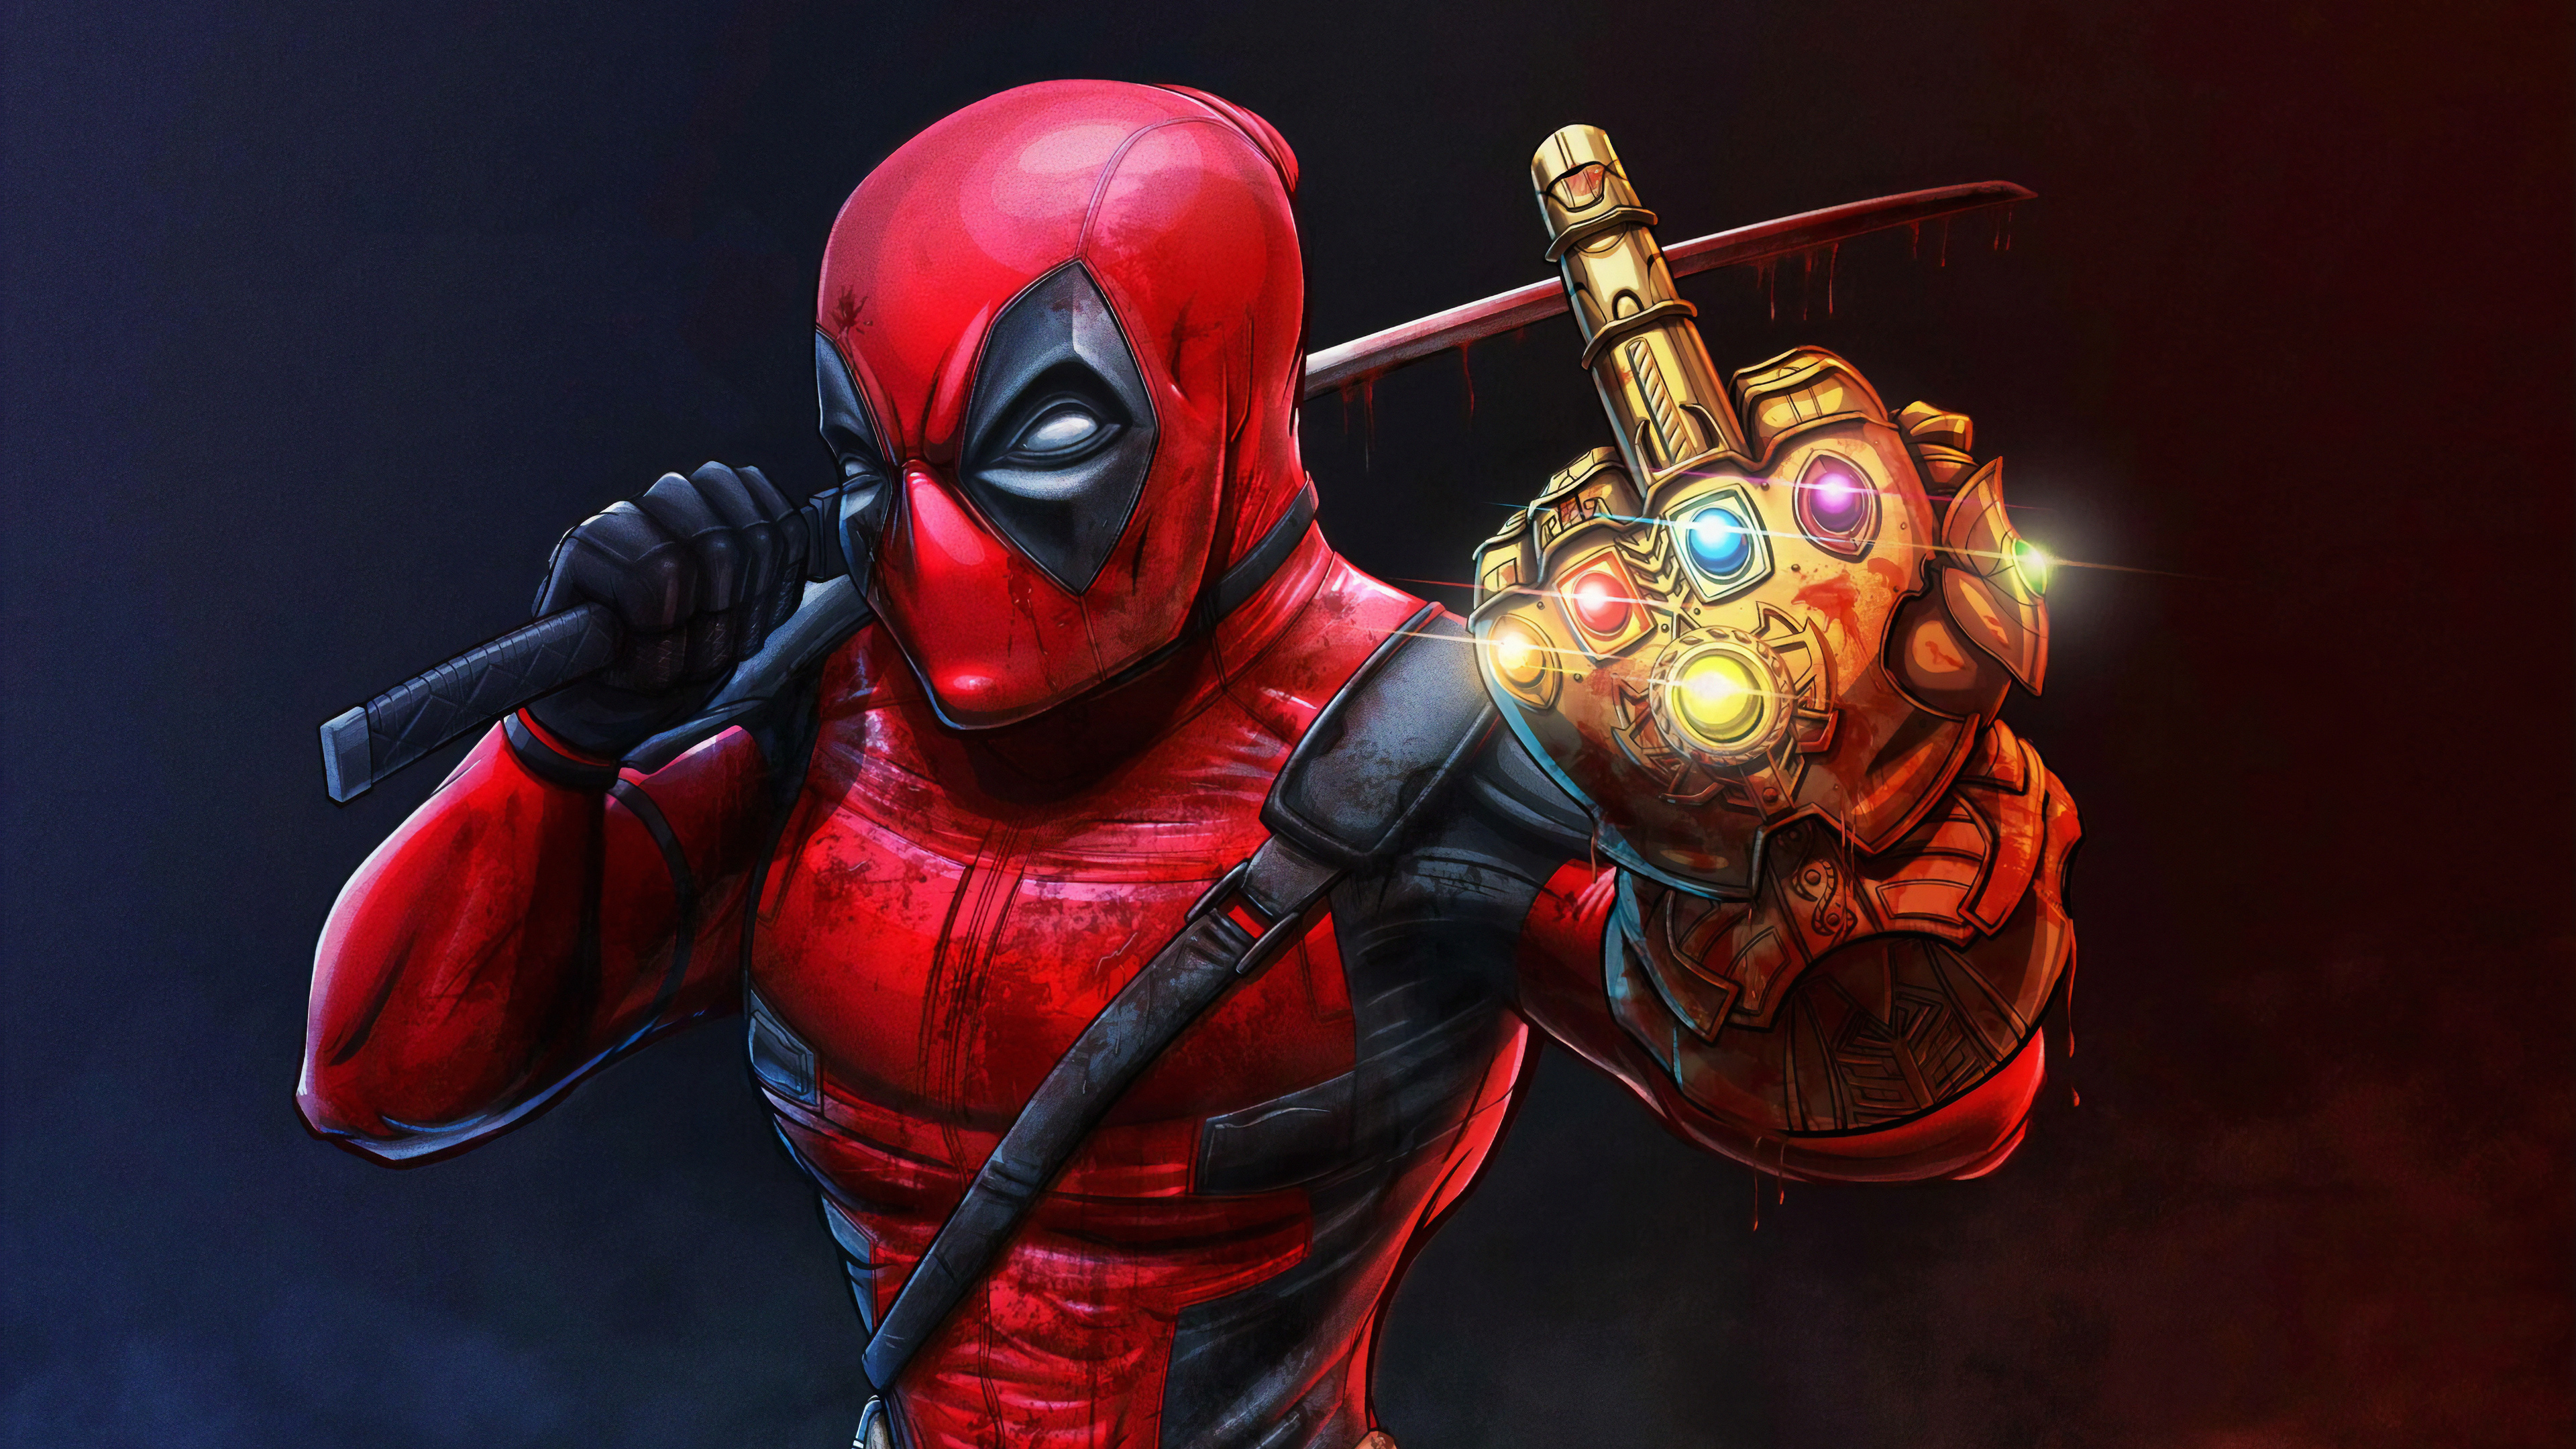 Deadpool DesktopHut - Live Wallpapers and Animated Wallpapers 4K/HD